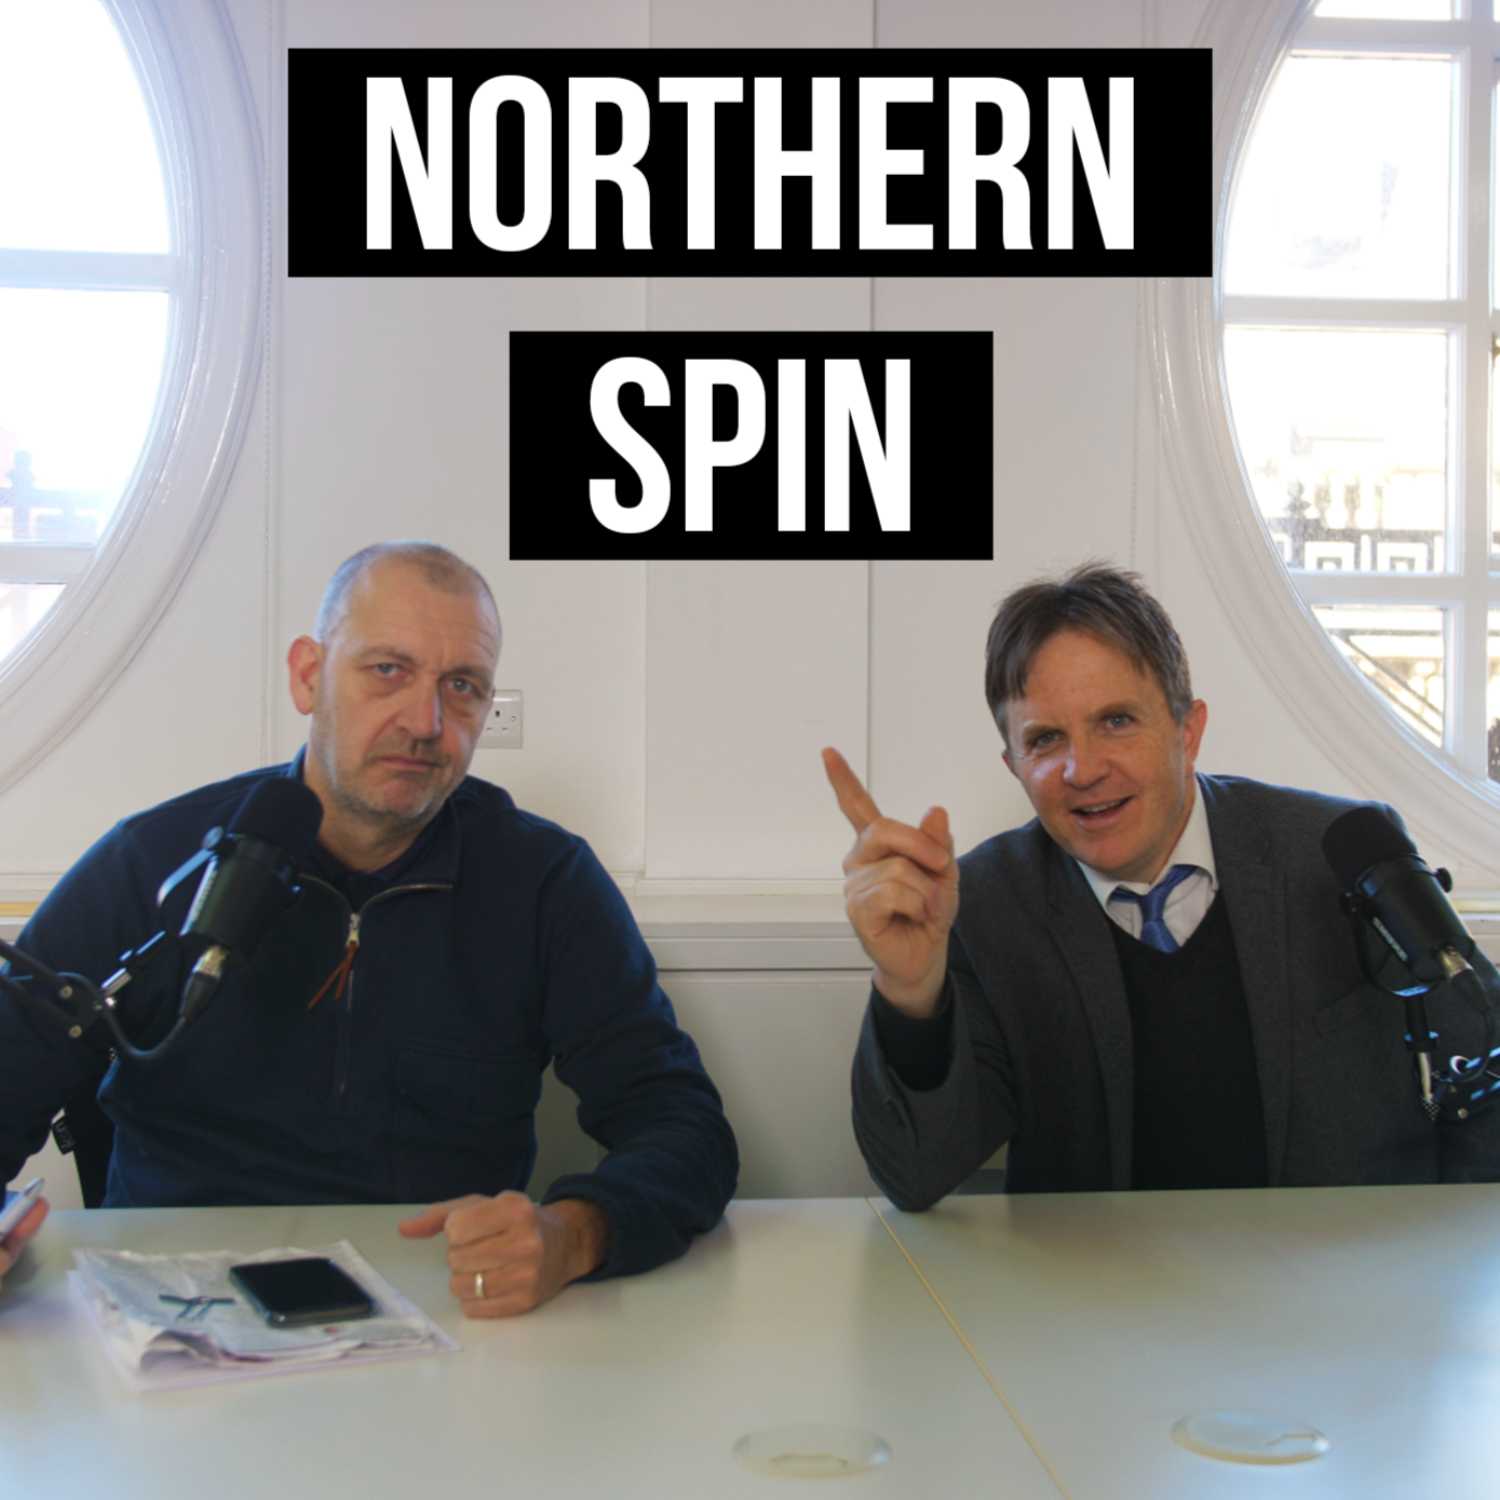 Northern Spin - Season 5 - Episode 3: The Great HS2 Misselling Scandal